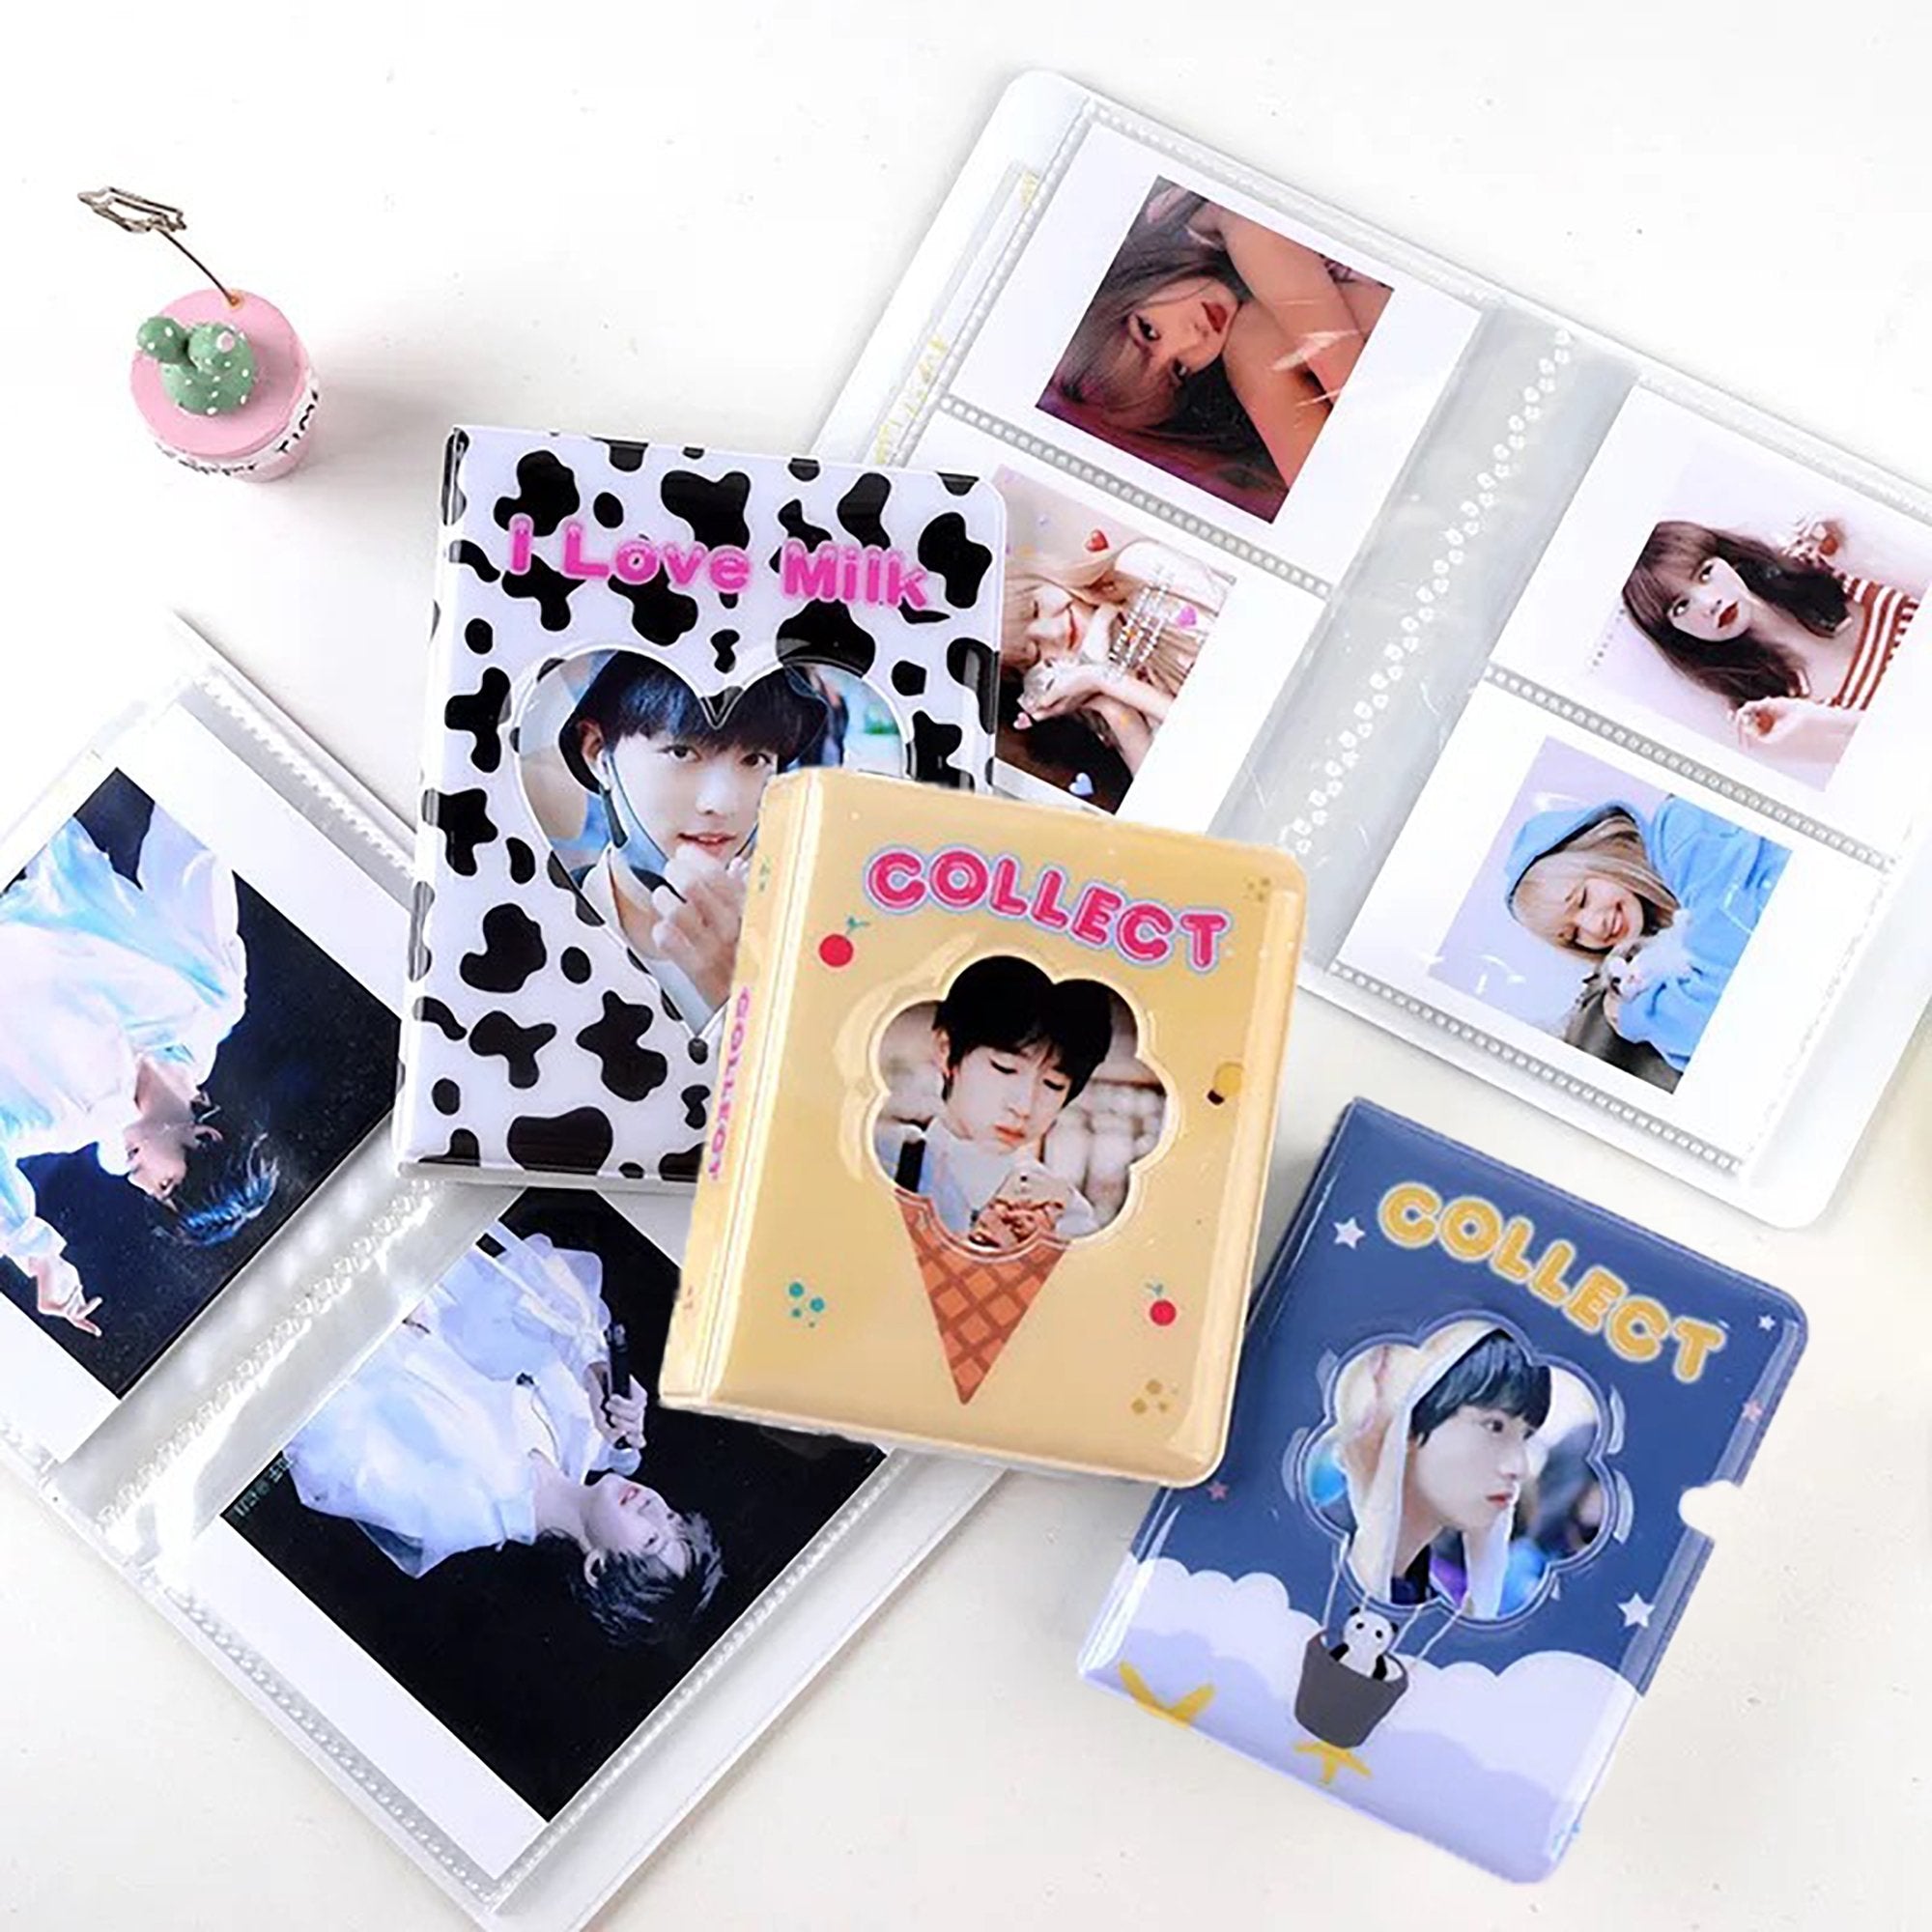 NEW Pagination Mark Holographic Ticket Goods Collection Korean BL